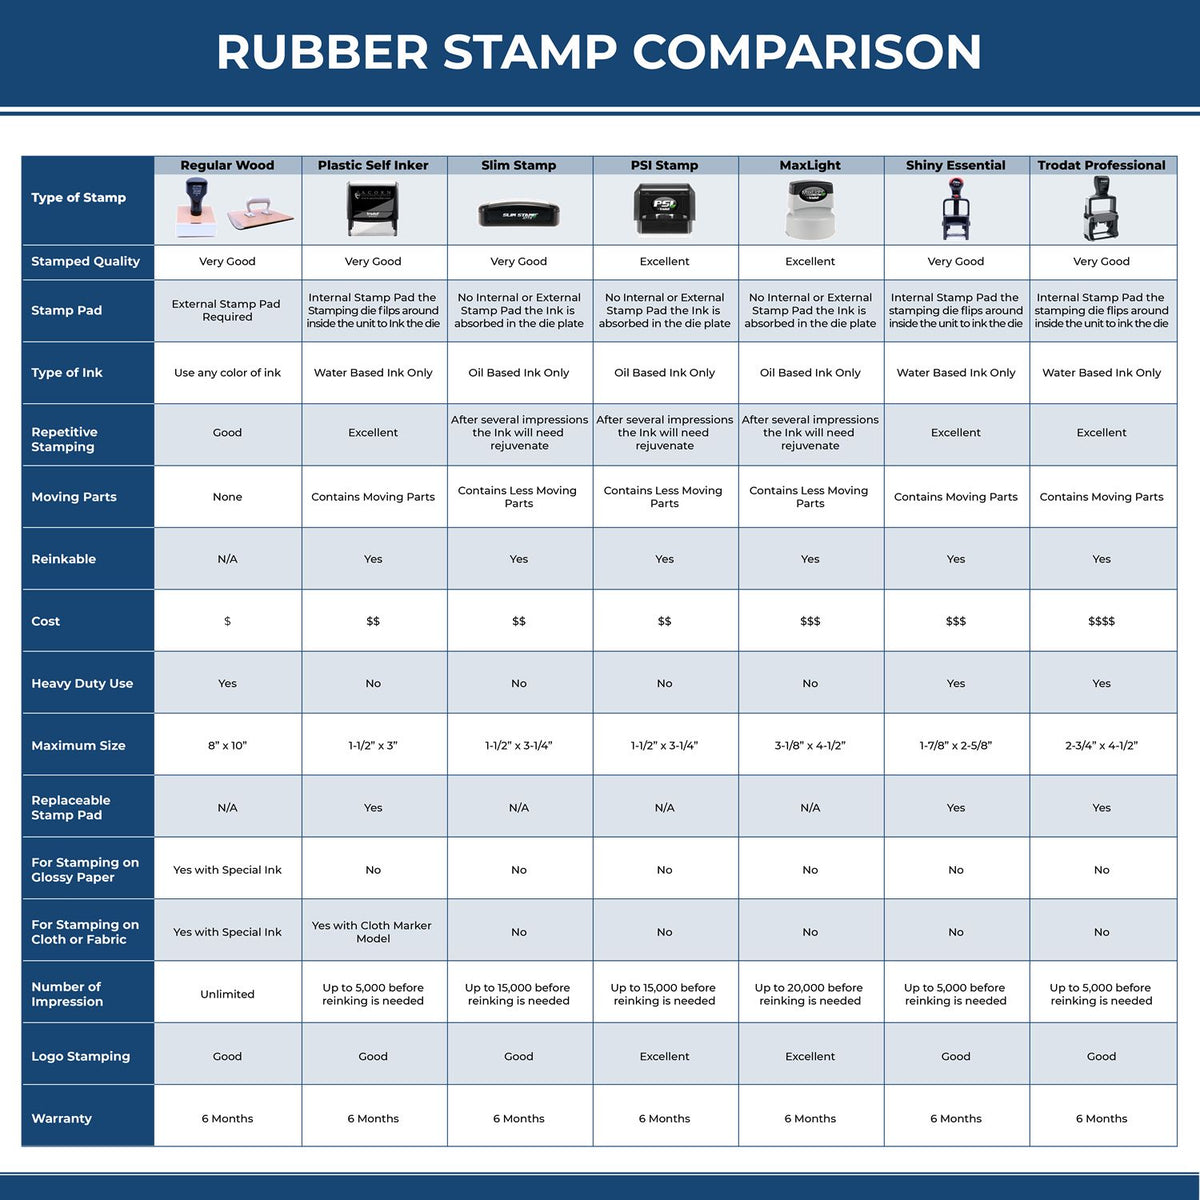 Large Self Inking Caution Stamp 4556S Rubber Stamp Comparison